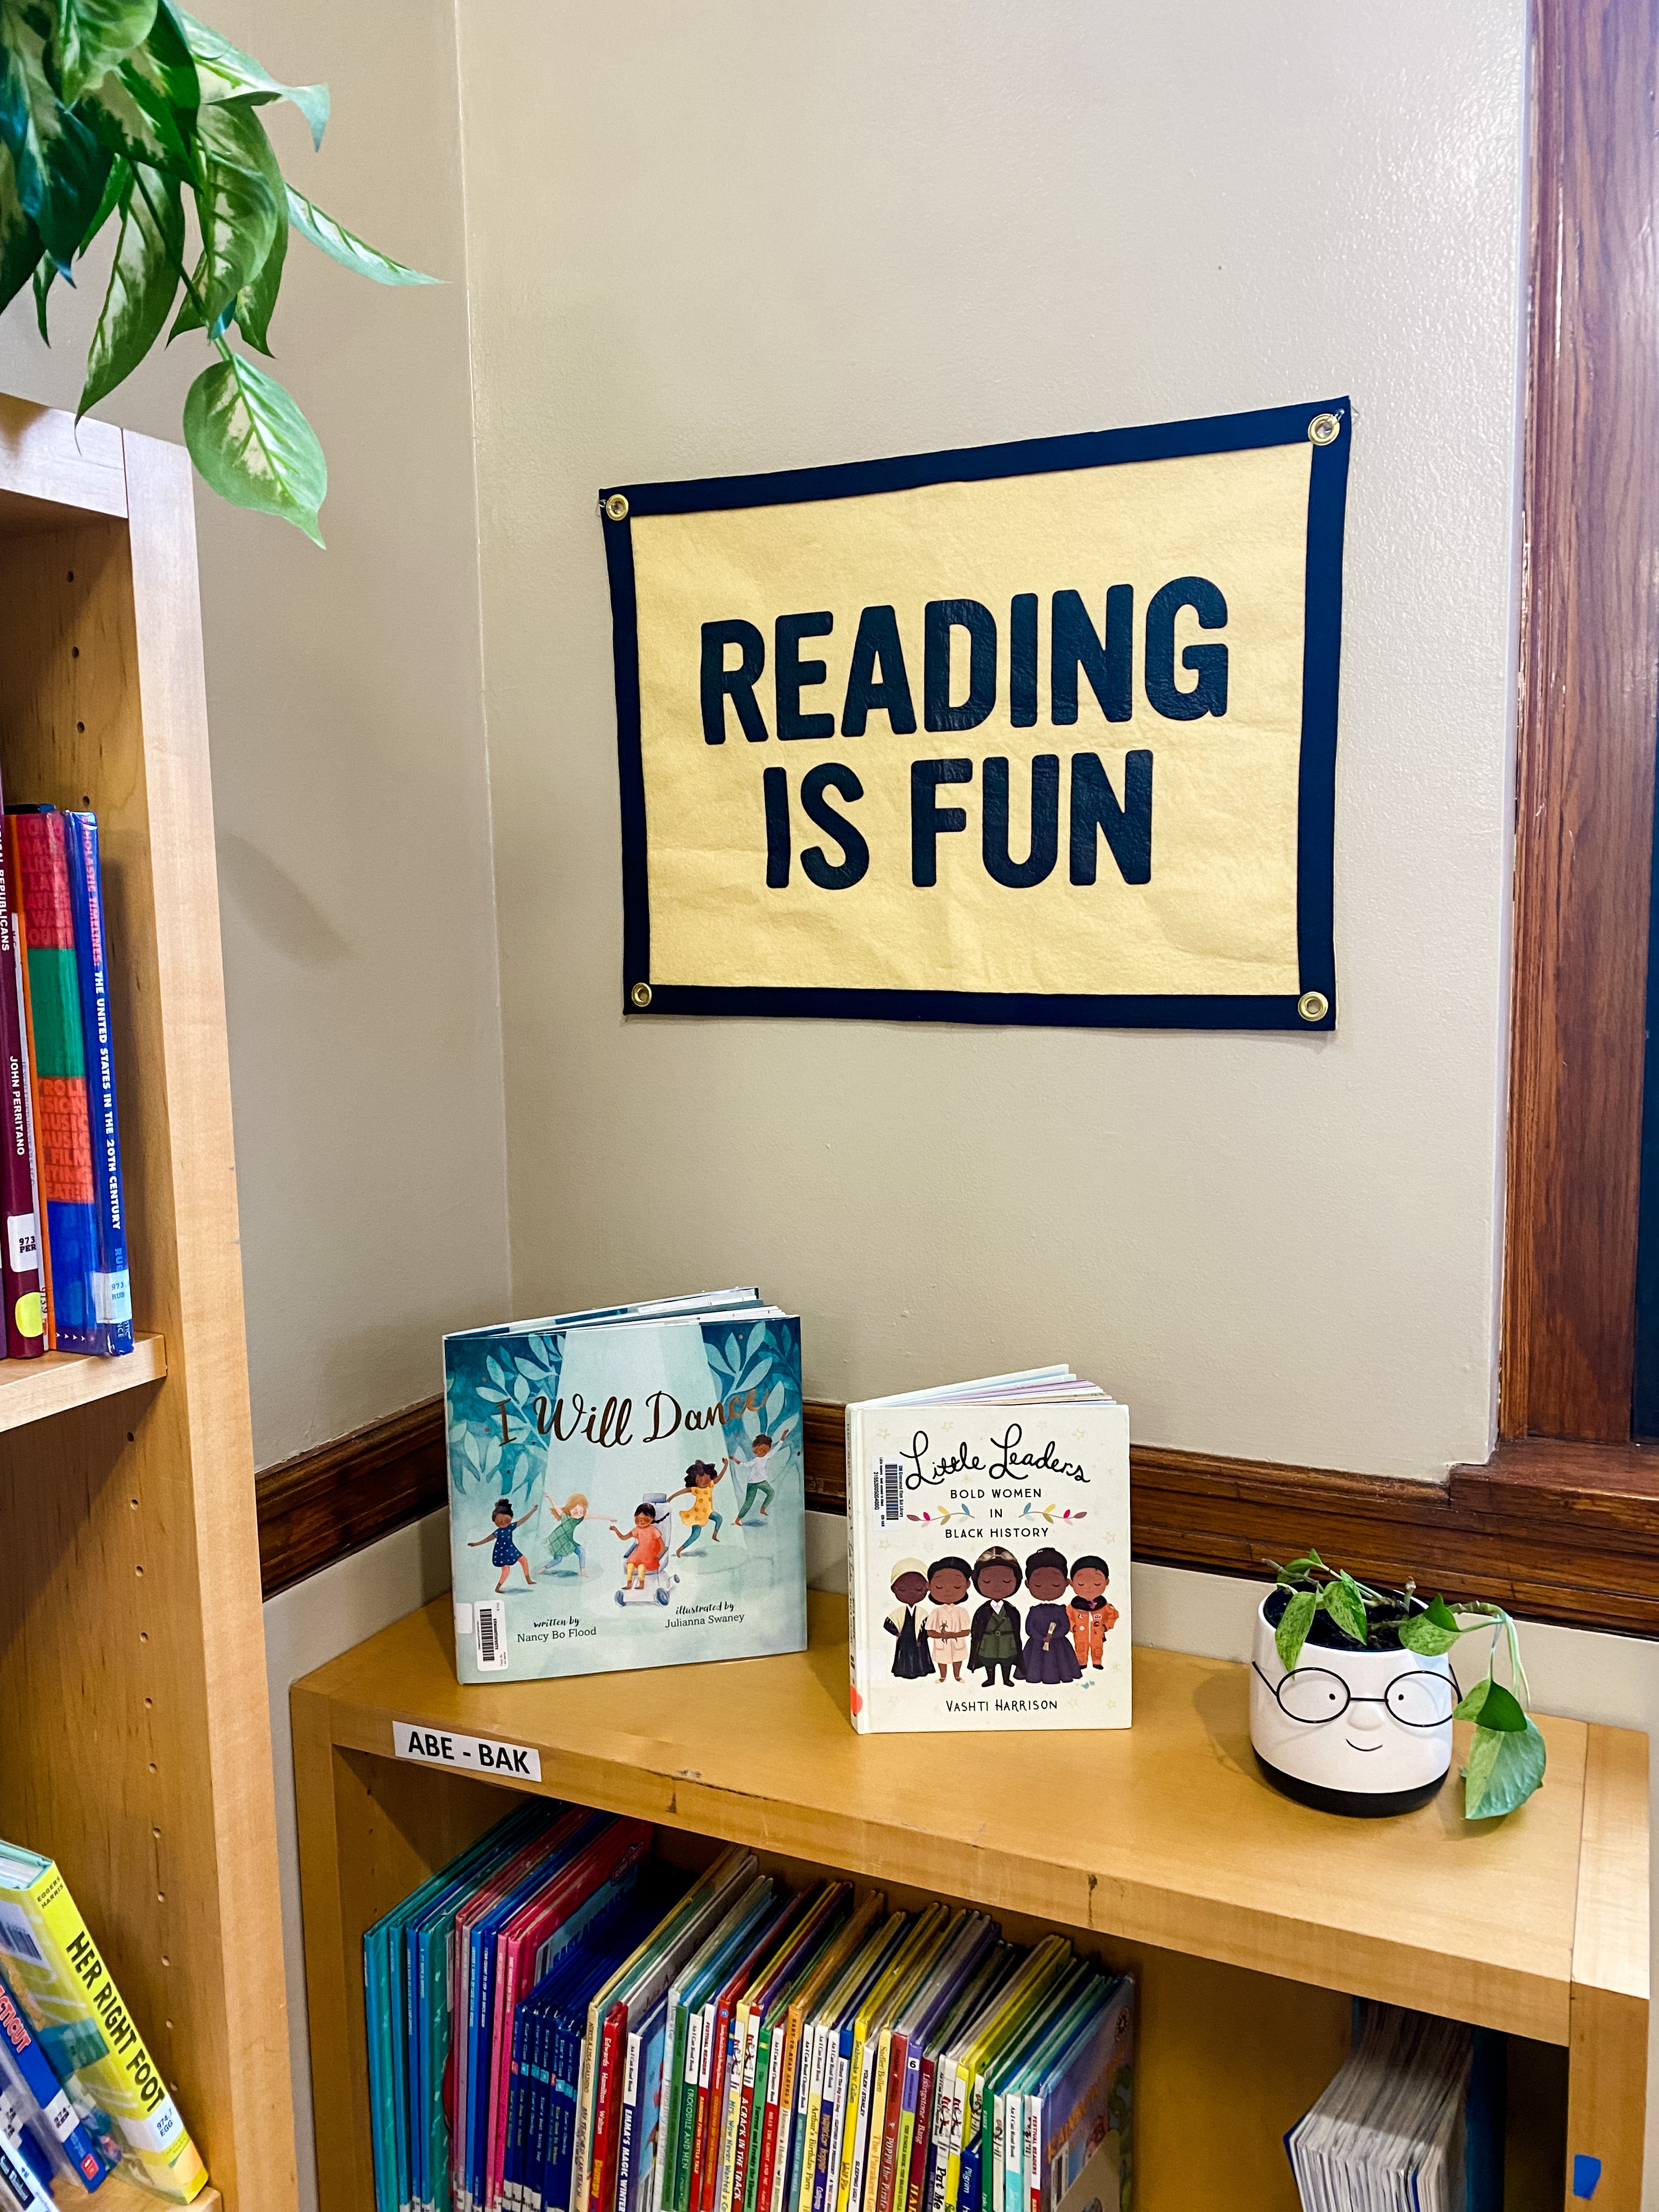 Reading Is Fun Camp Flag